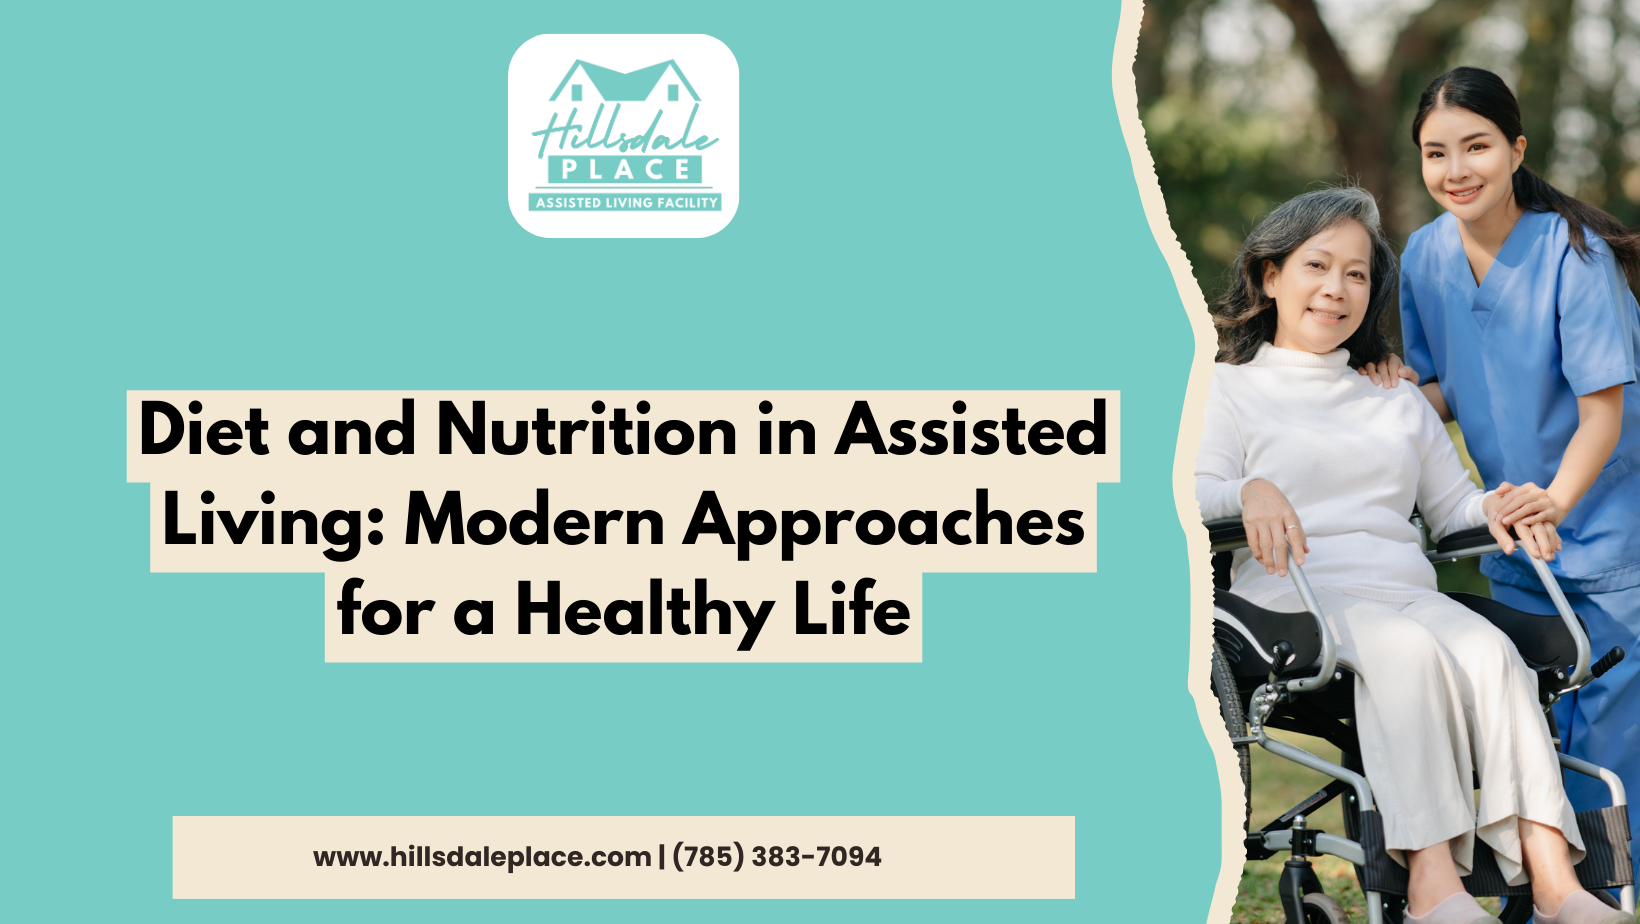 Diet and Nutrition in Assisted Living: Modern Approaches for a Healthy Life